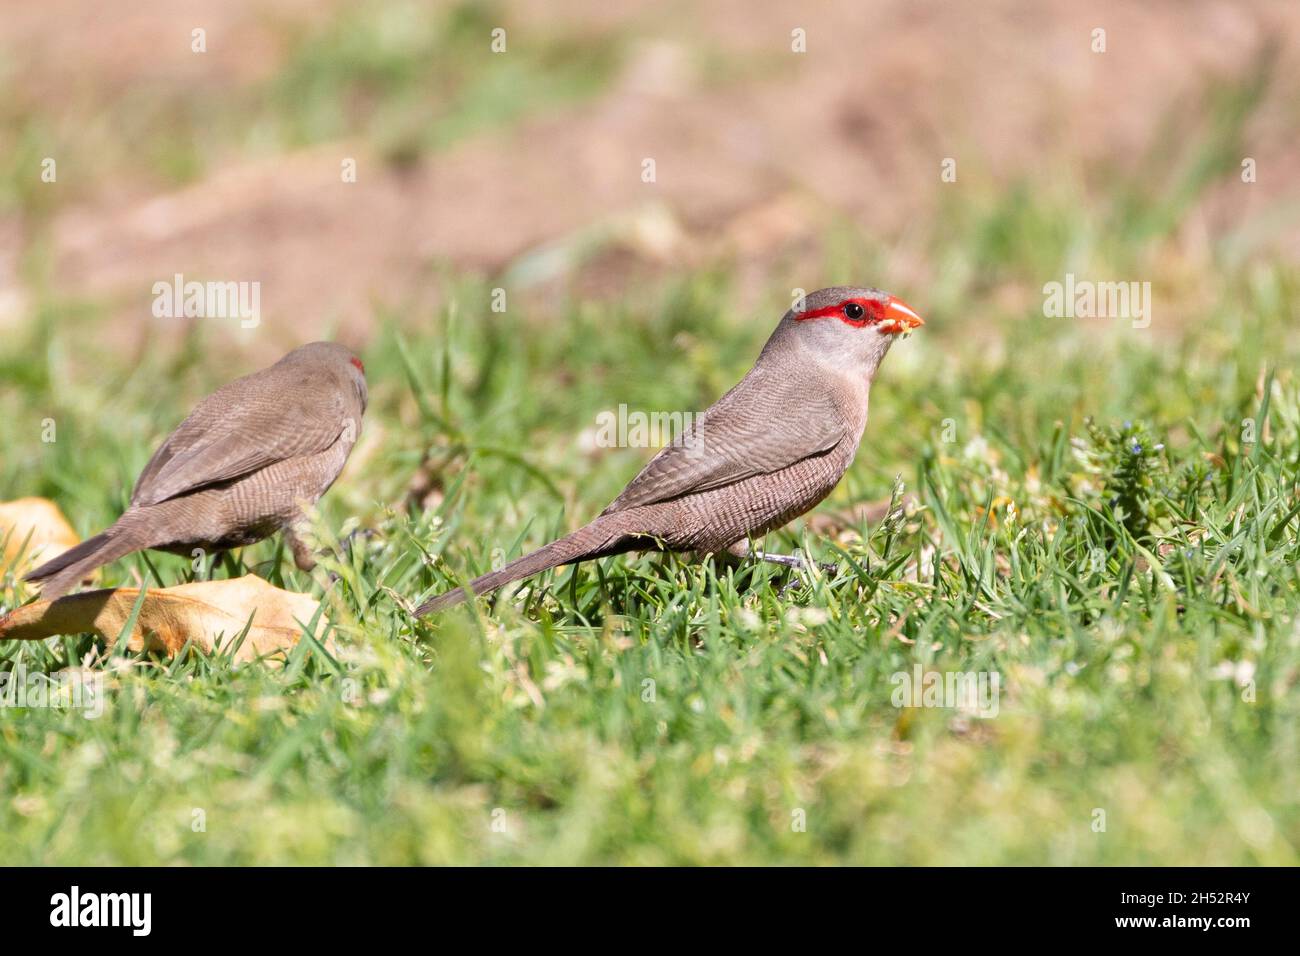 Common Waxbill or St Helena Waxbill (Estrilda astrild) a small estrildid finch foraging for seeds on grass in spring, Western Cape, South Africa. Stock Photo